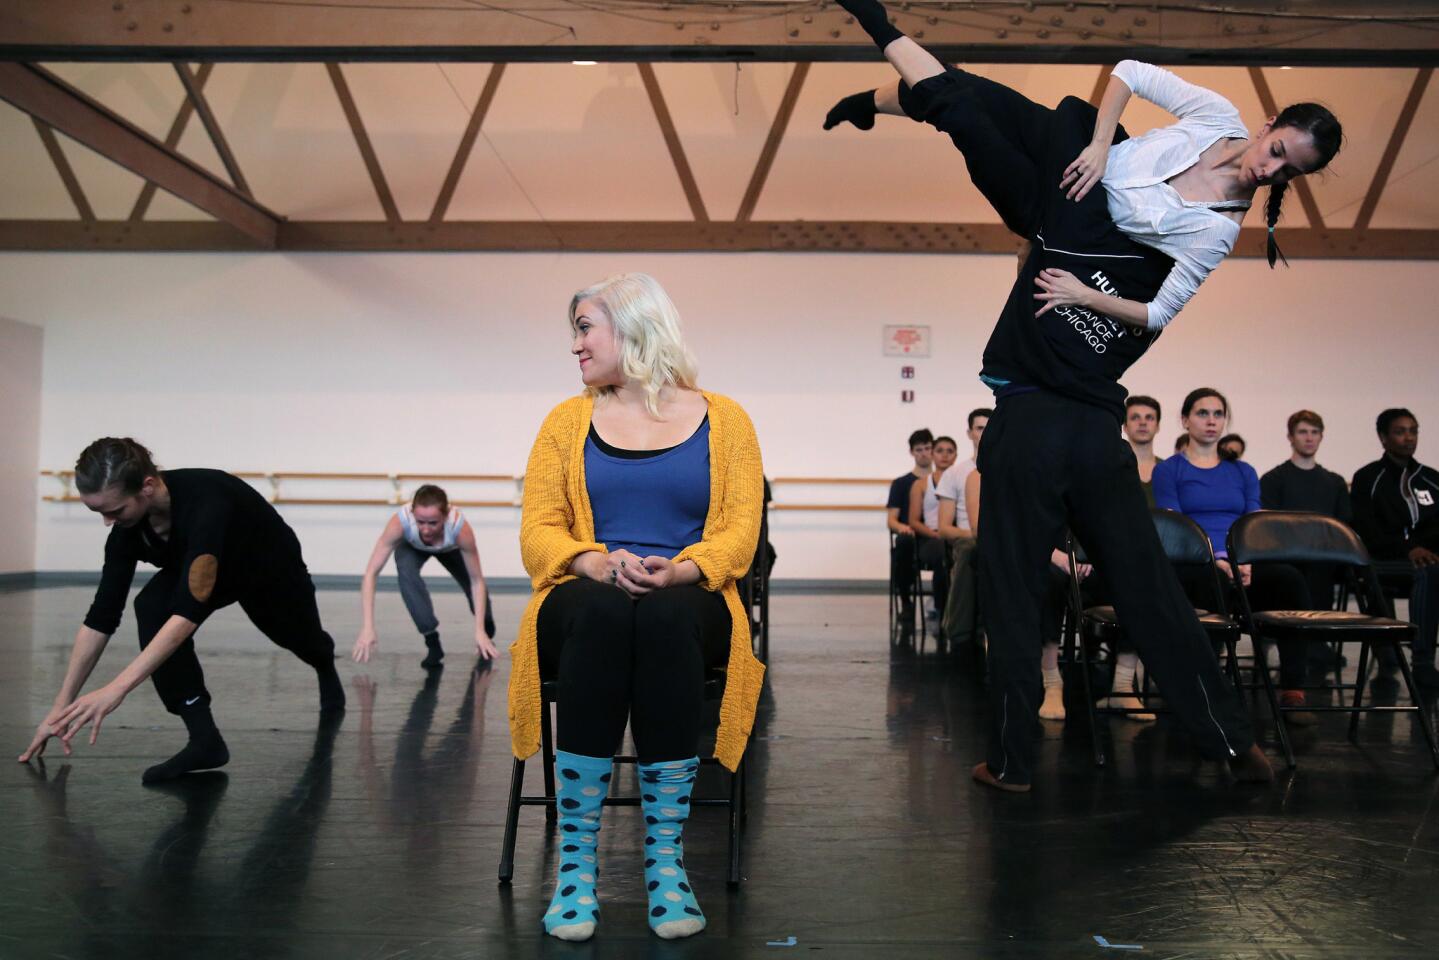 Ensemble member Carisa Barreca, center, watches Hubbard Street dancers perform during a rehearsal for "The Art of Falling," a collaboration between Chicago's Hubbard Street and The Second City, Oct. 29 at the Hubbard Street Studios in Chicago.